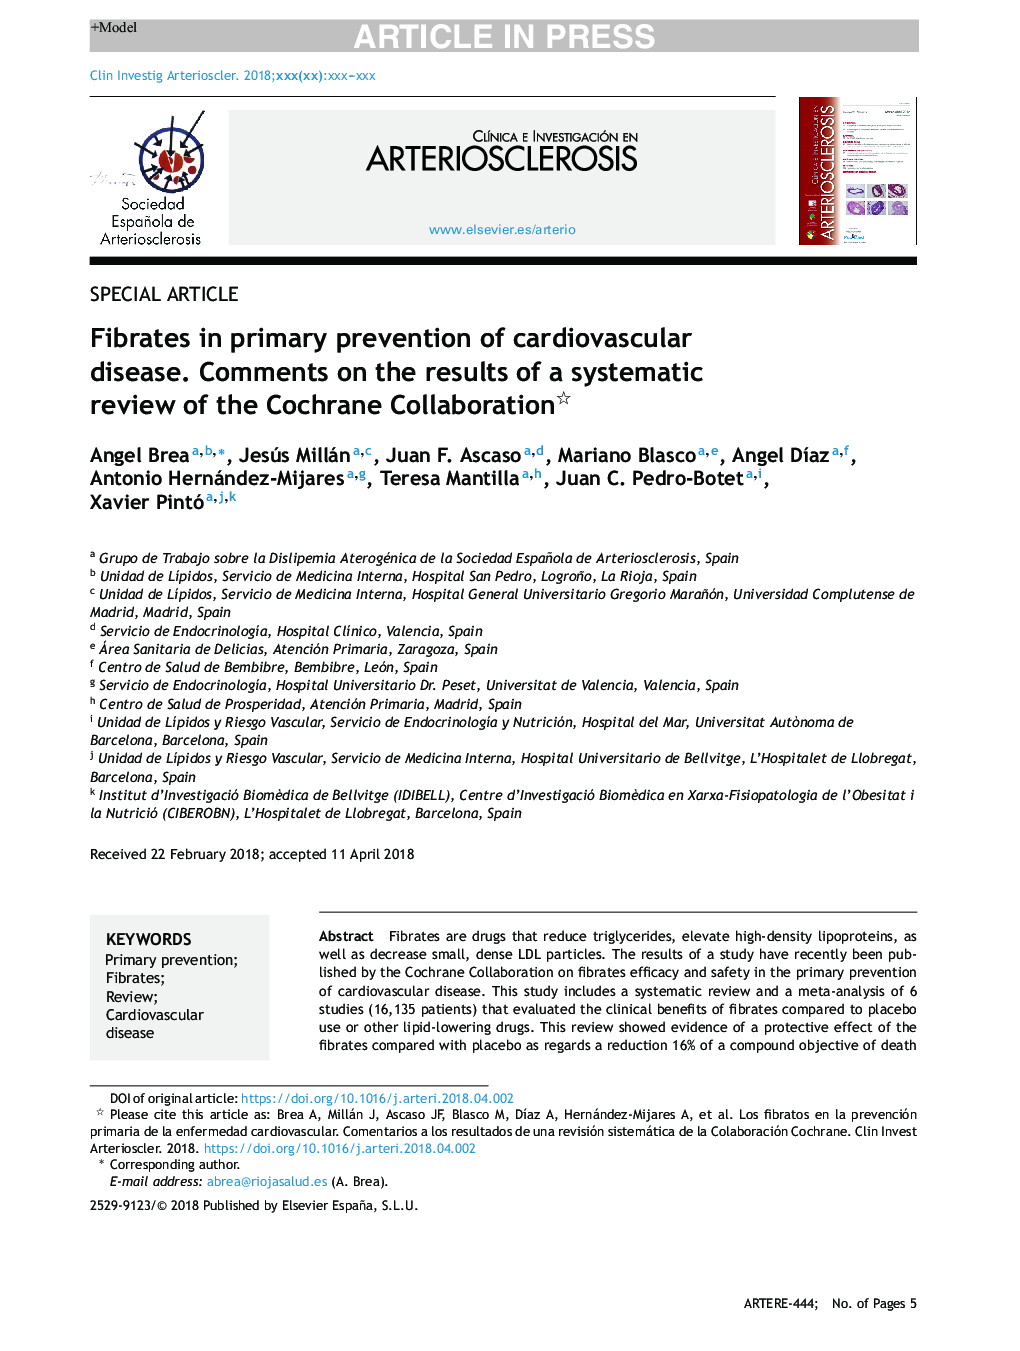 Fibrates in primary prevention of cardiovascular disease. Comments on the results of a systematic review of the Cochrane Collaboration